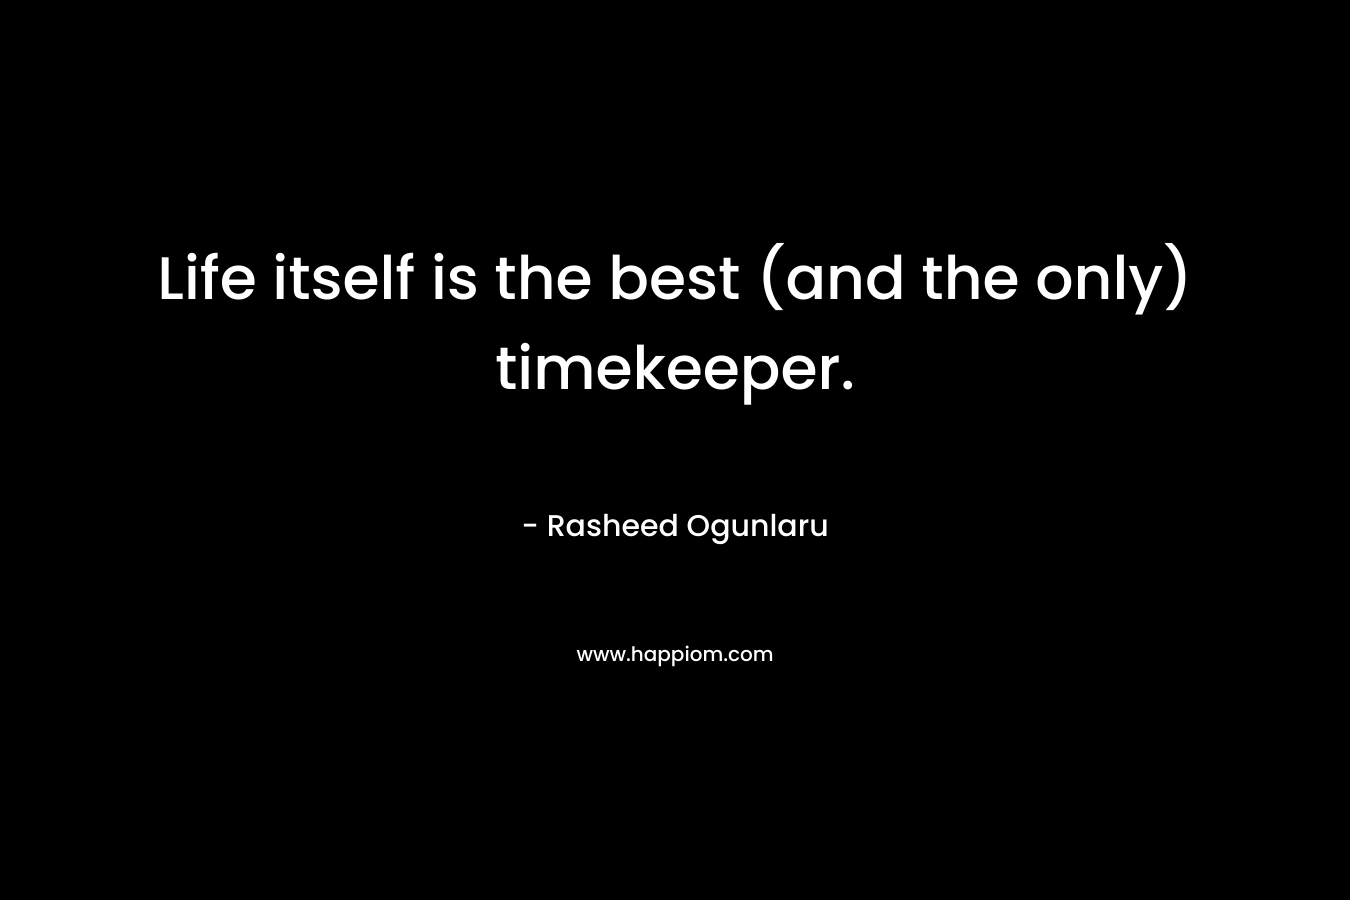 Life itself is the best (and the only) timekeeper.